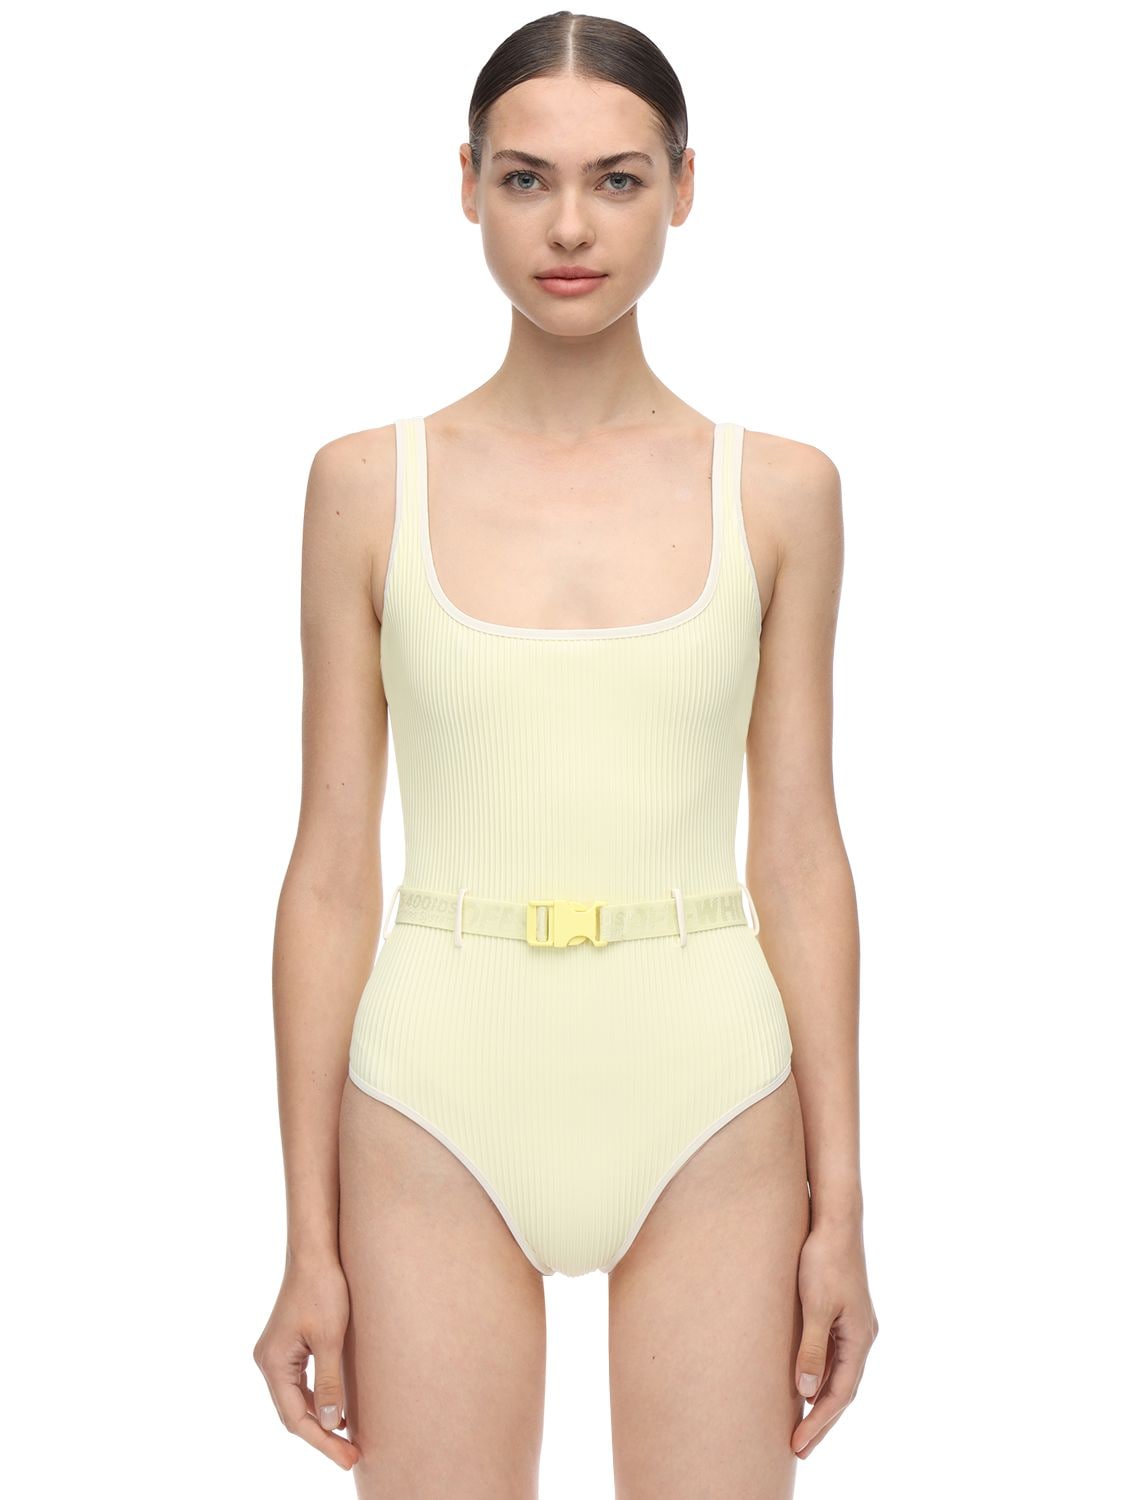 OFF-WHITE BELTED ONE PIECE SWIMSUIT,70I3KW096-NJAWMA2